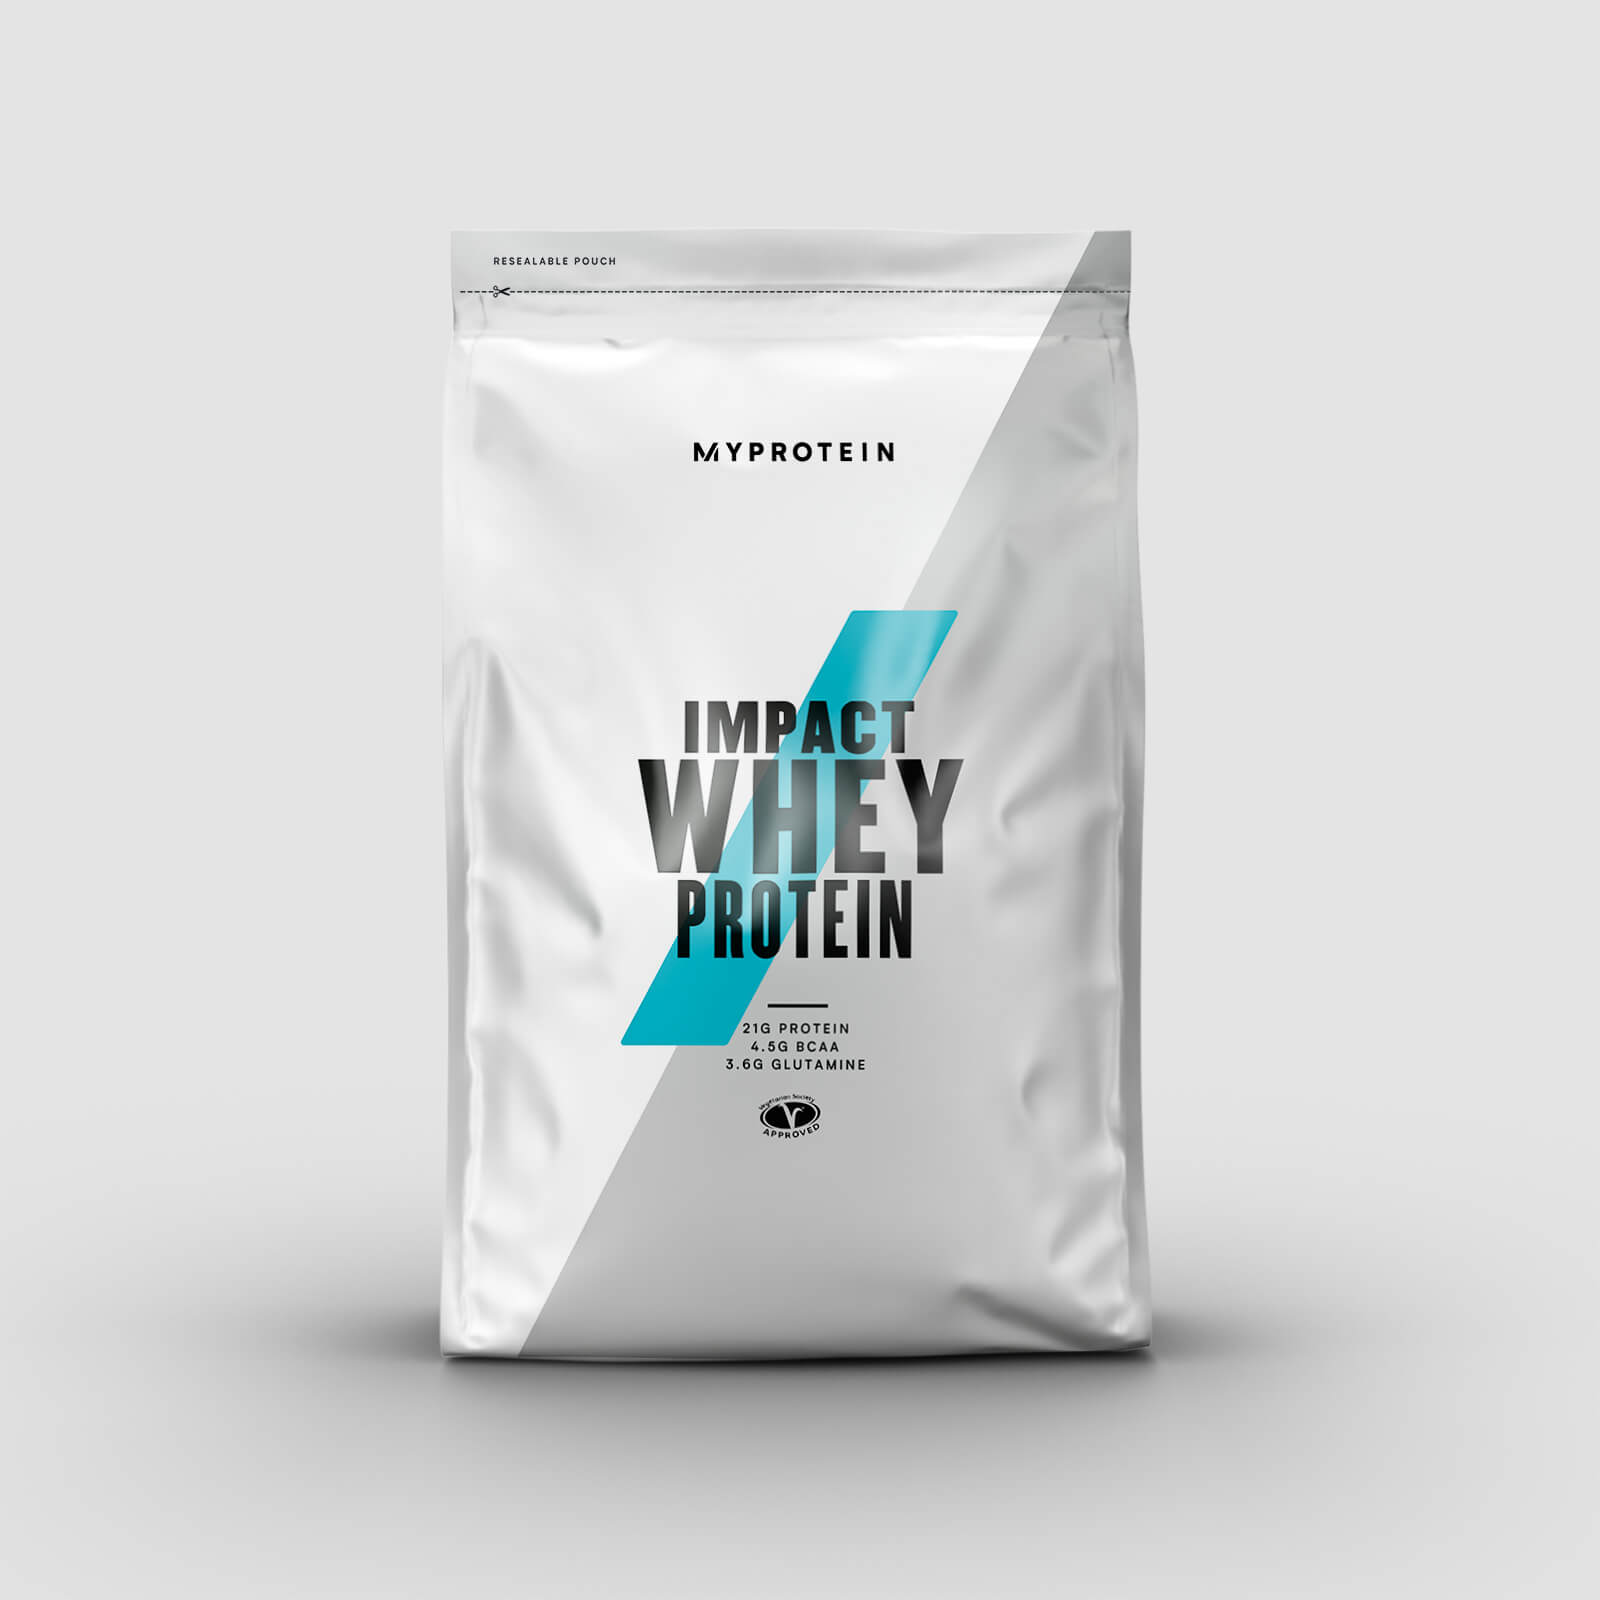 Myprotein Impact Whey Protein - 1kg - Chocolate Coconut - New and Improved